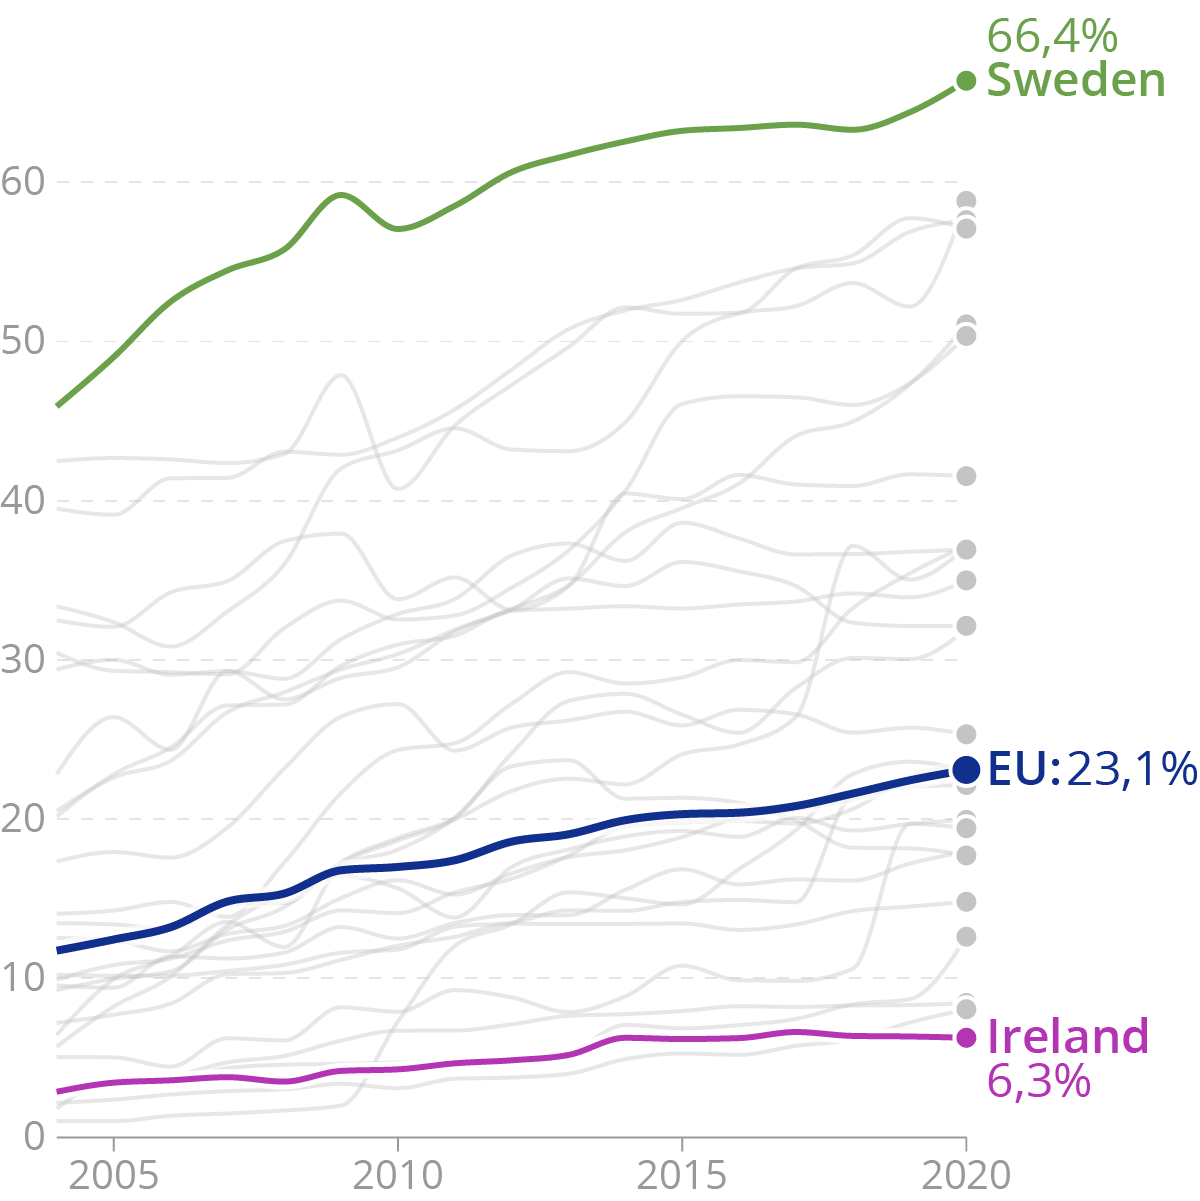 A line chart showing trends for all EU member states, with the lines for Sweden, Ireland and the EU average labelled and highlighted with colours